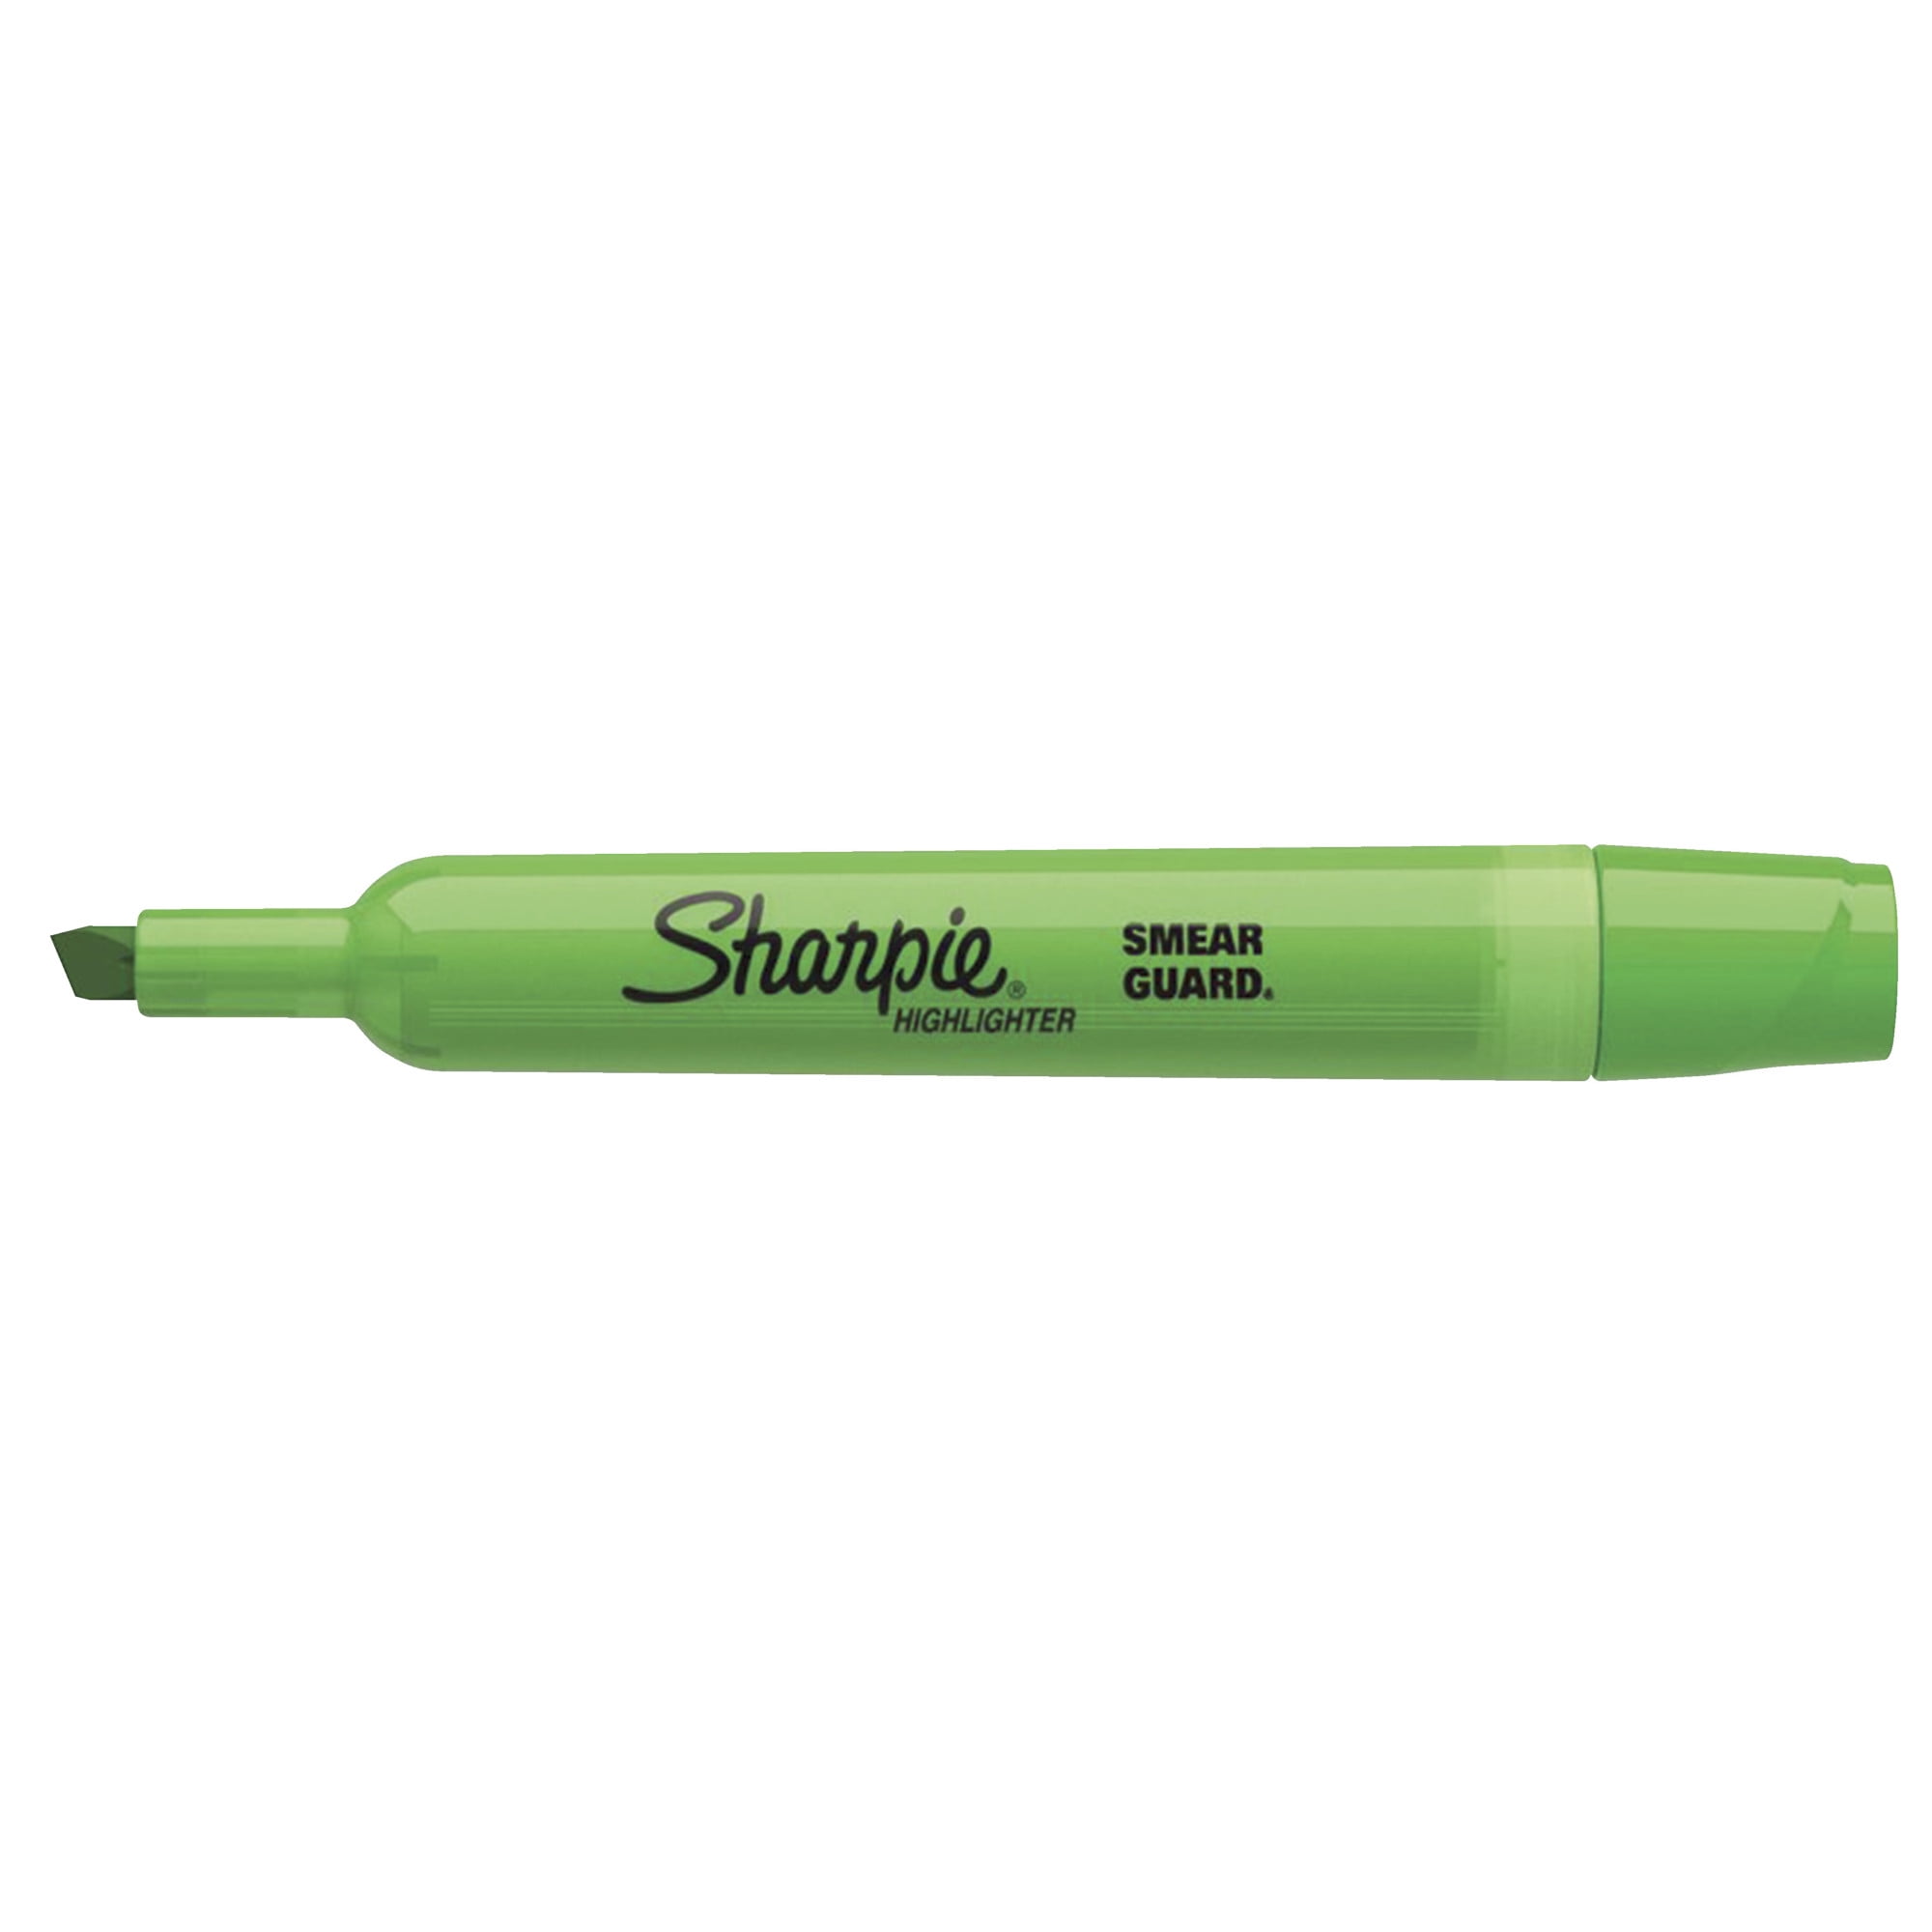 Sharpie Smear Guard Blade Highlighter - LD Products